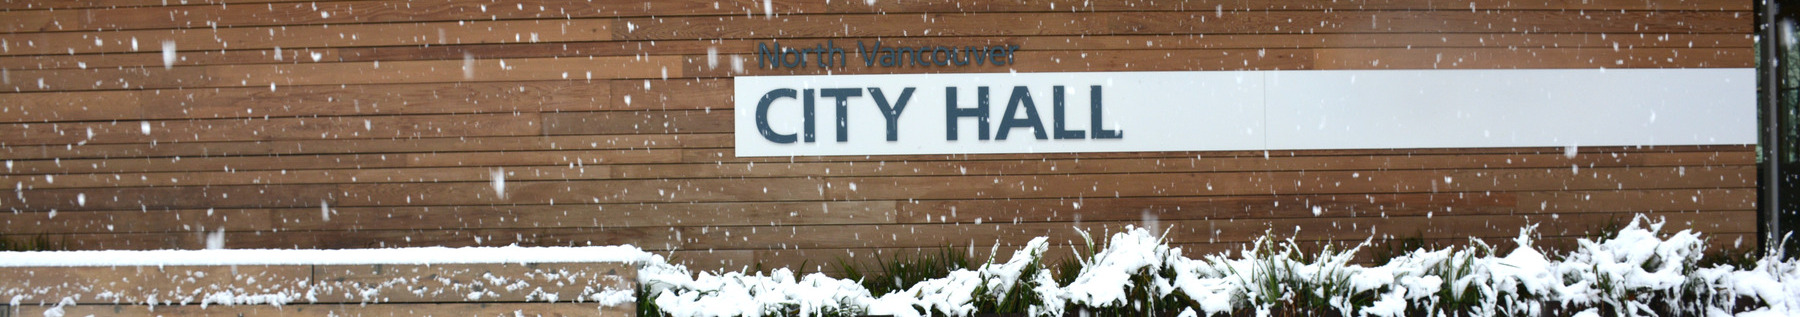 snow falling in Civic Plaza